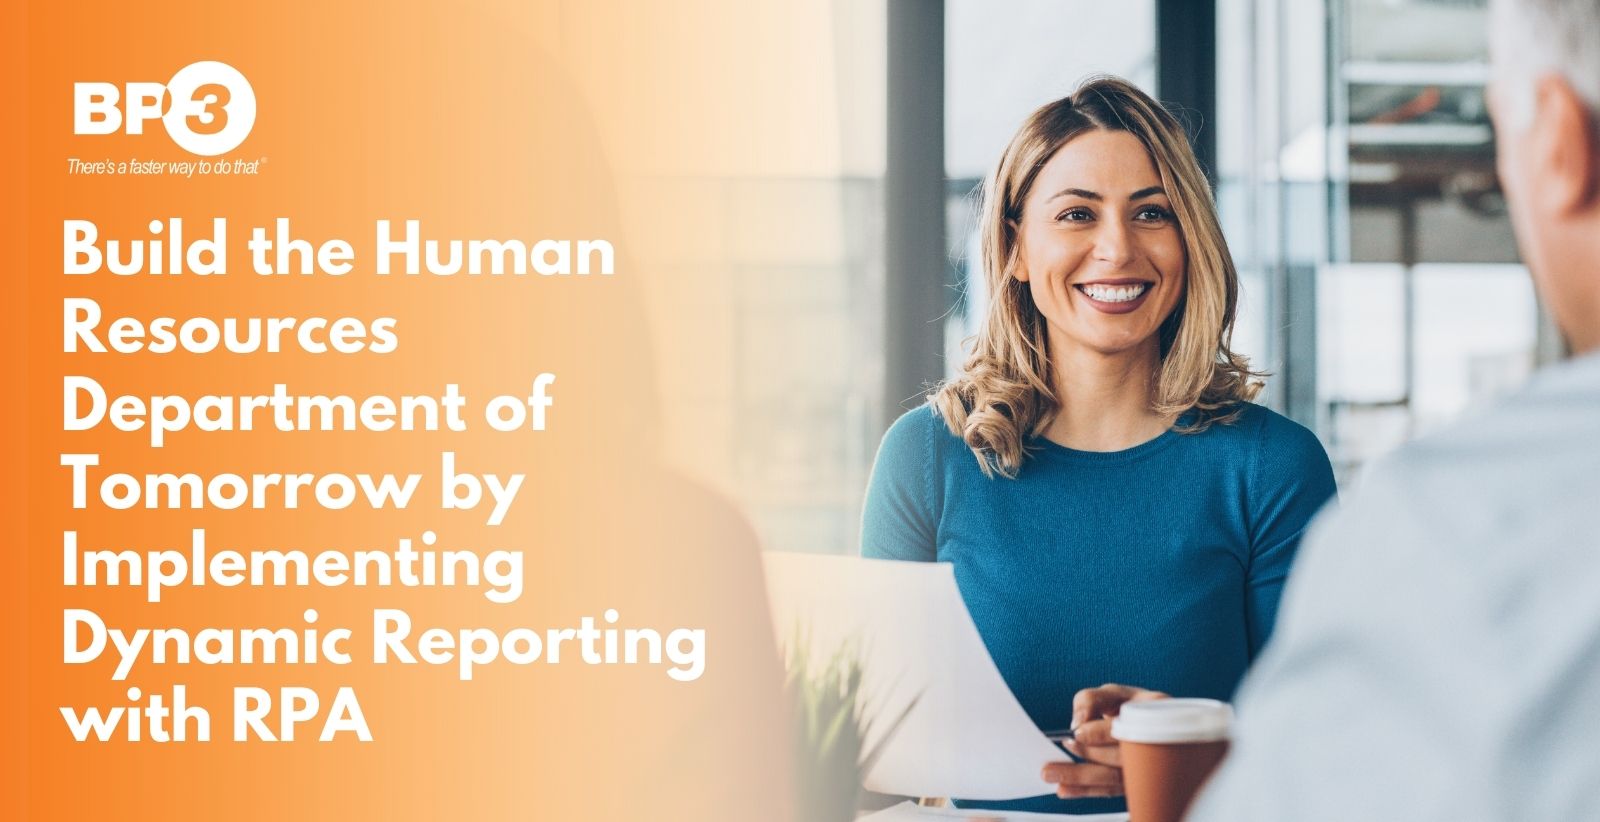 Build the Human Resources Department of Tomorrow by Implementing Dynamic Reporting with RPA